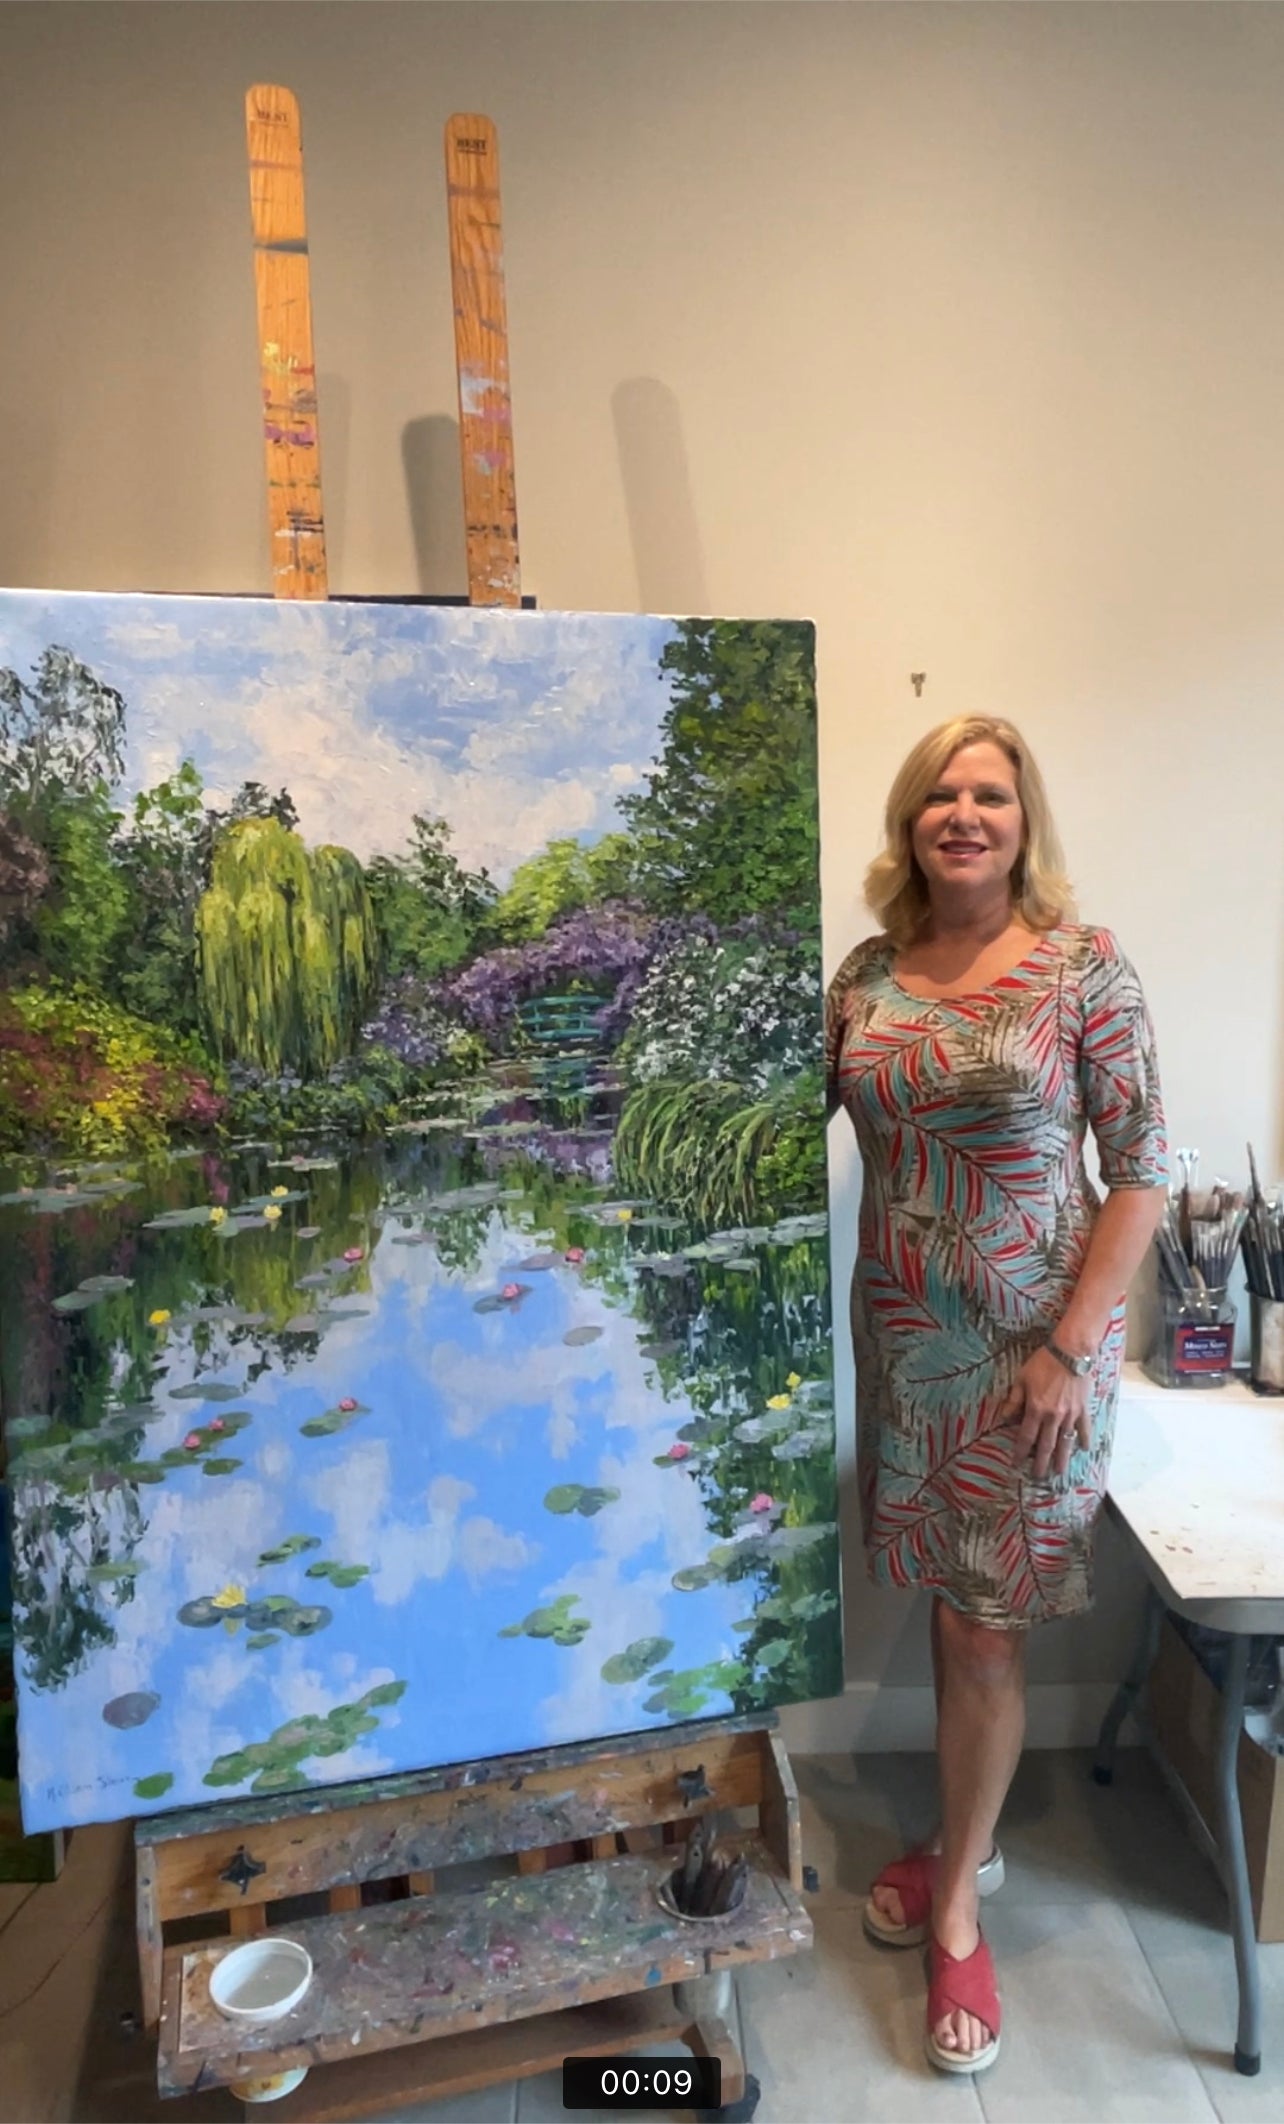 The Beauty Of Giverny, Extra Large 60" x 40" Oil Painting, Garden Landscape Of Monet's Waterlily Pond